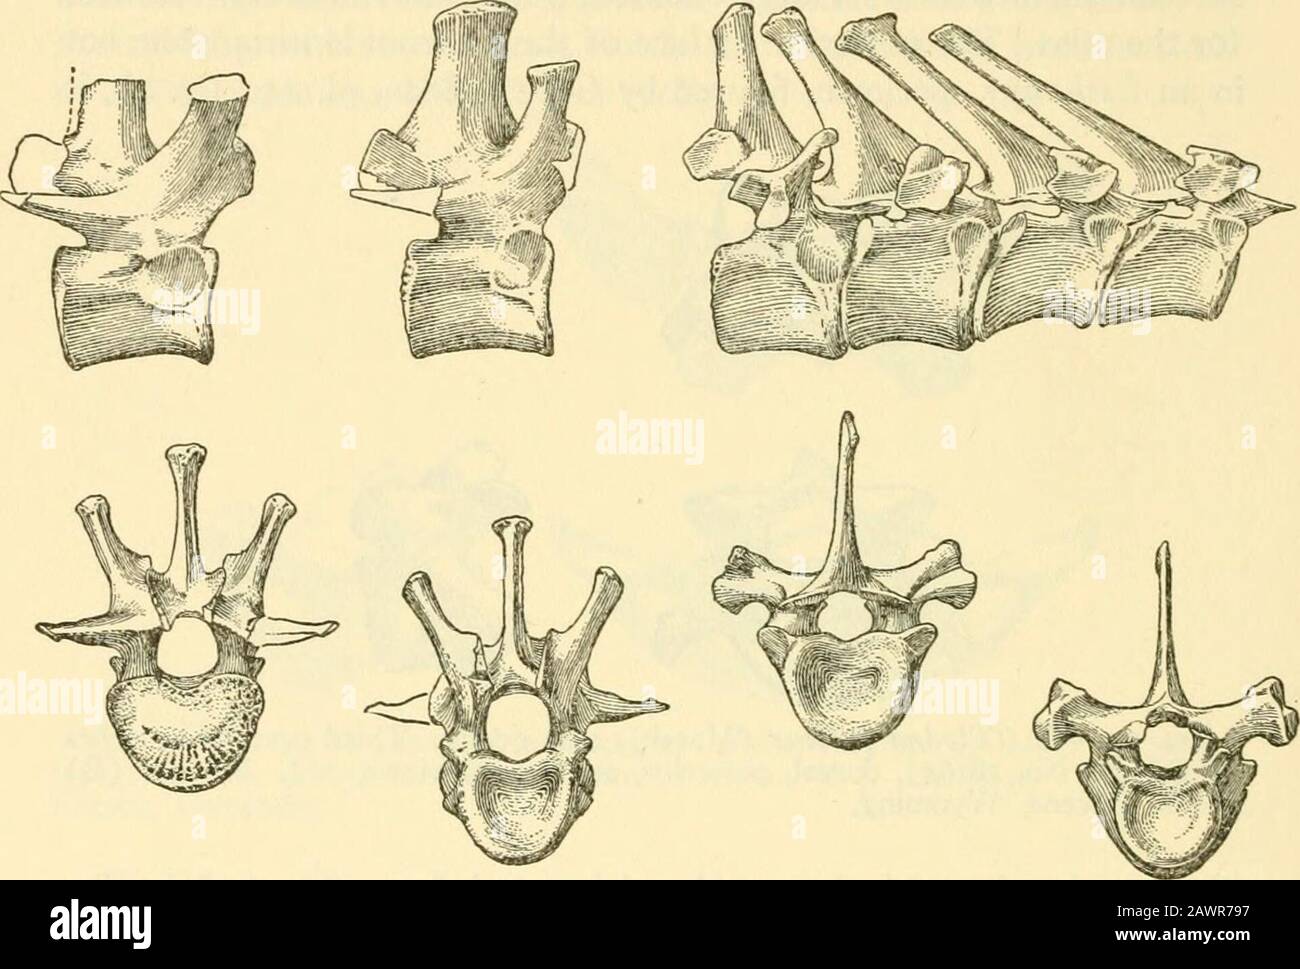 Smithsonian miscellaneous collections . arterialcanal is obscured by matrix. The remaining cervicals of Trogosus, however, have short, broadcentra and sturdy arches. The transverse processes are narrow, back-ward sweeping and, except for the seventh, have good-sized verte-brarterial canals. The zygapophyses are widely expanded for thenearly circular articular surfaces. 7^ SMITHSONIAN MISCELLANEOUS COLLECTIONS VOL, 121 The dorsal series in Trogosus is known by but six vertebrae (fig.25). Four of these are marked as having been found in articulation.The centra are noticeably narrower than in the Stock Photo